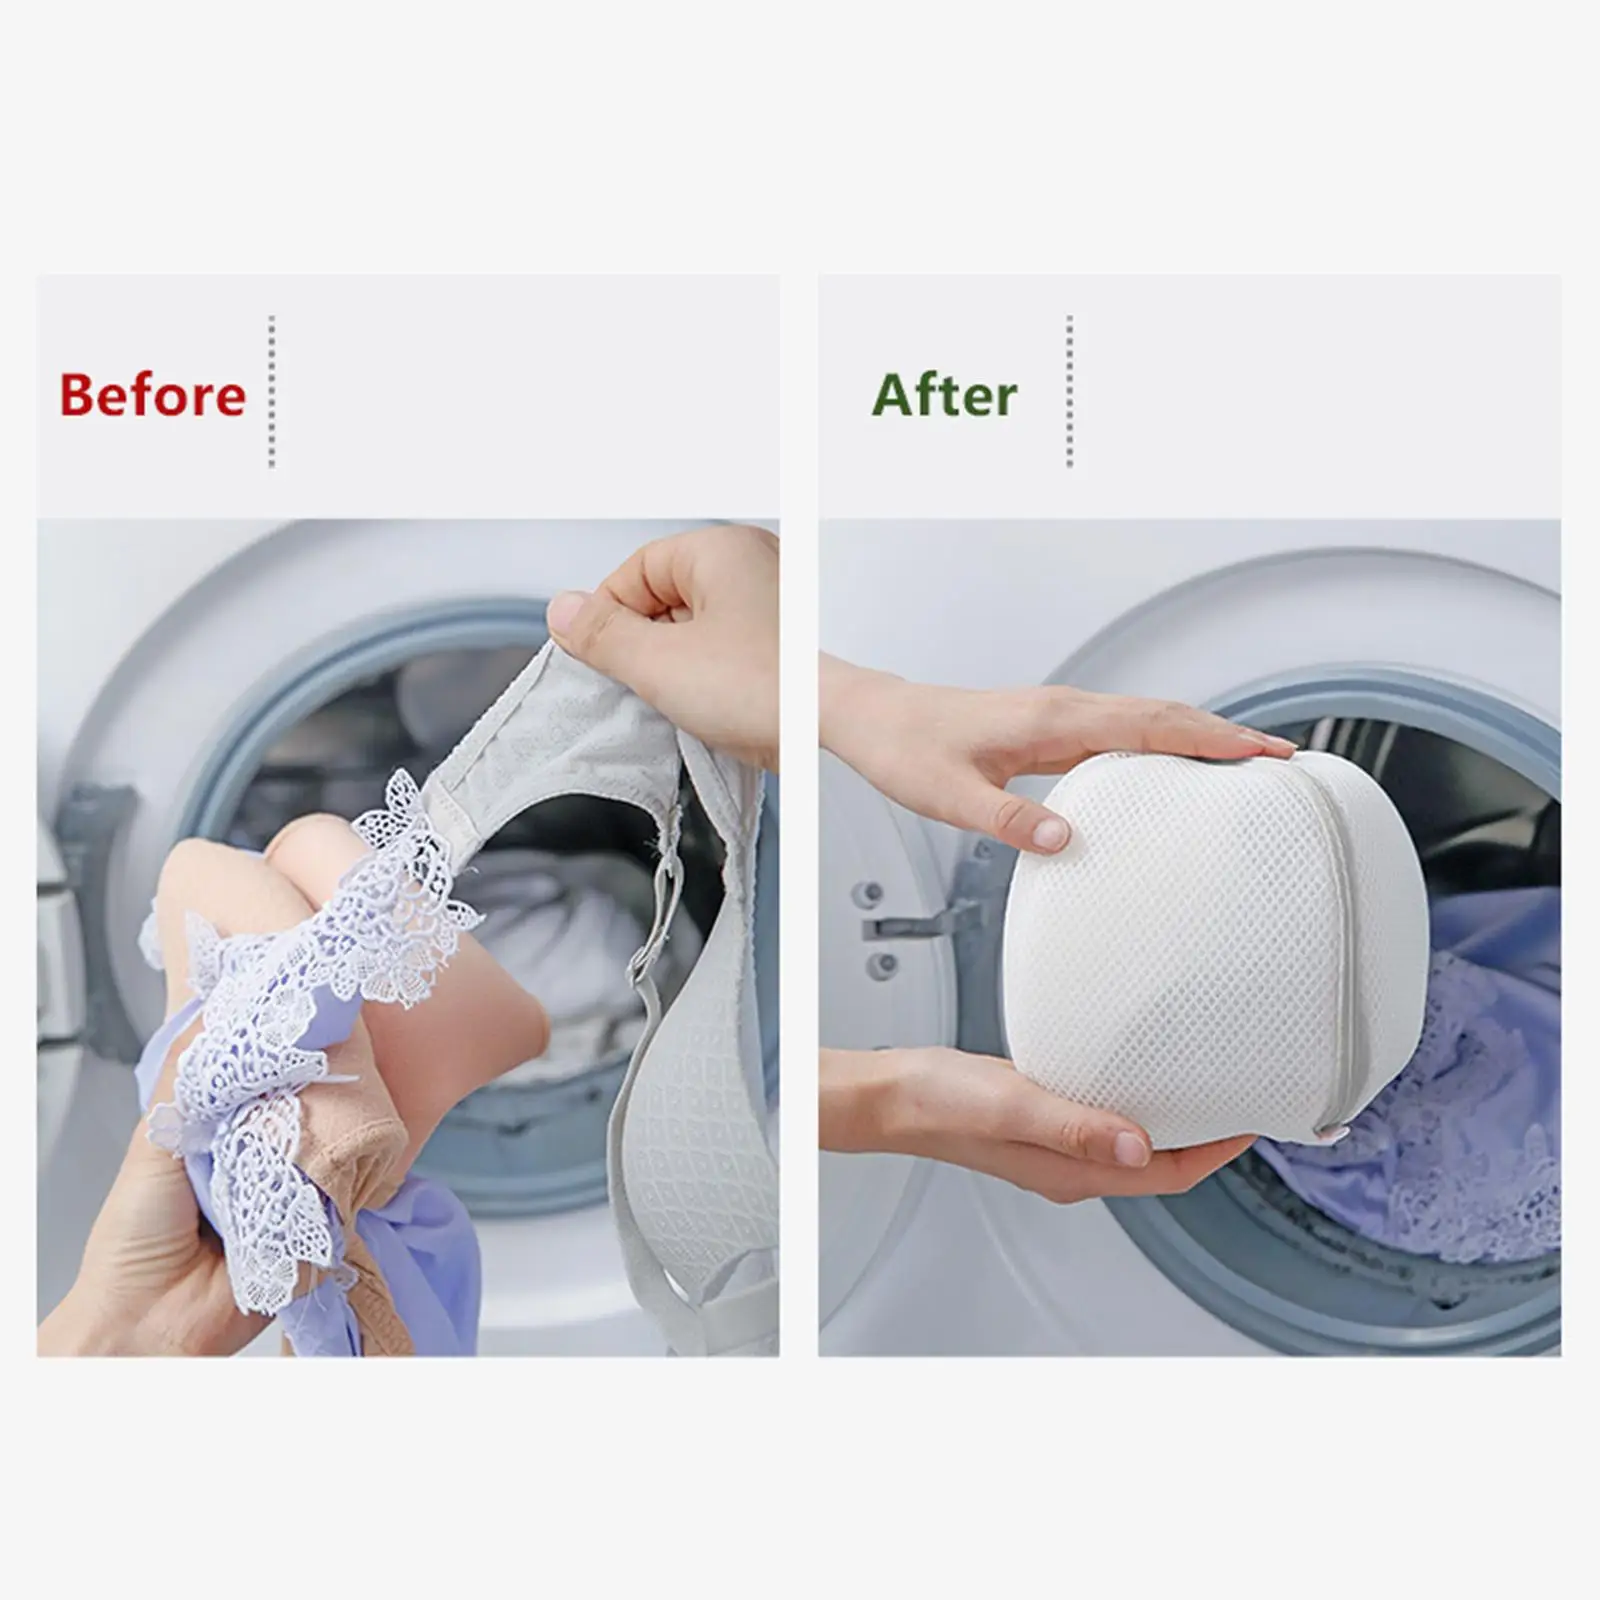 Bra Wash Bag with Zipper Laundry Wash Pouch Reusable Washing Mesh Bag Durable for Hosiery Socks Travel Friendly Household